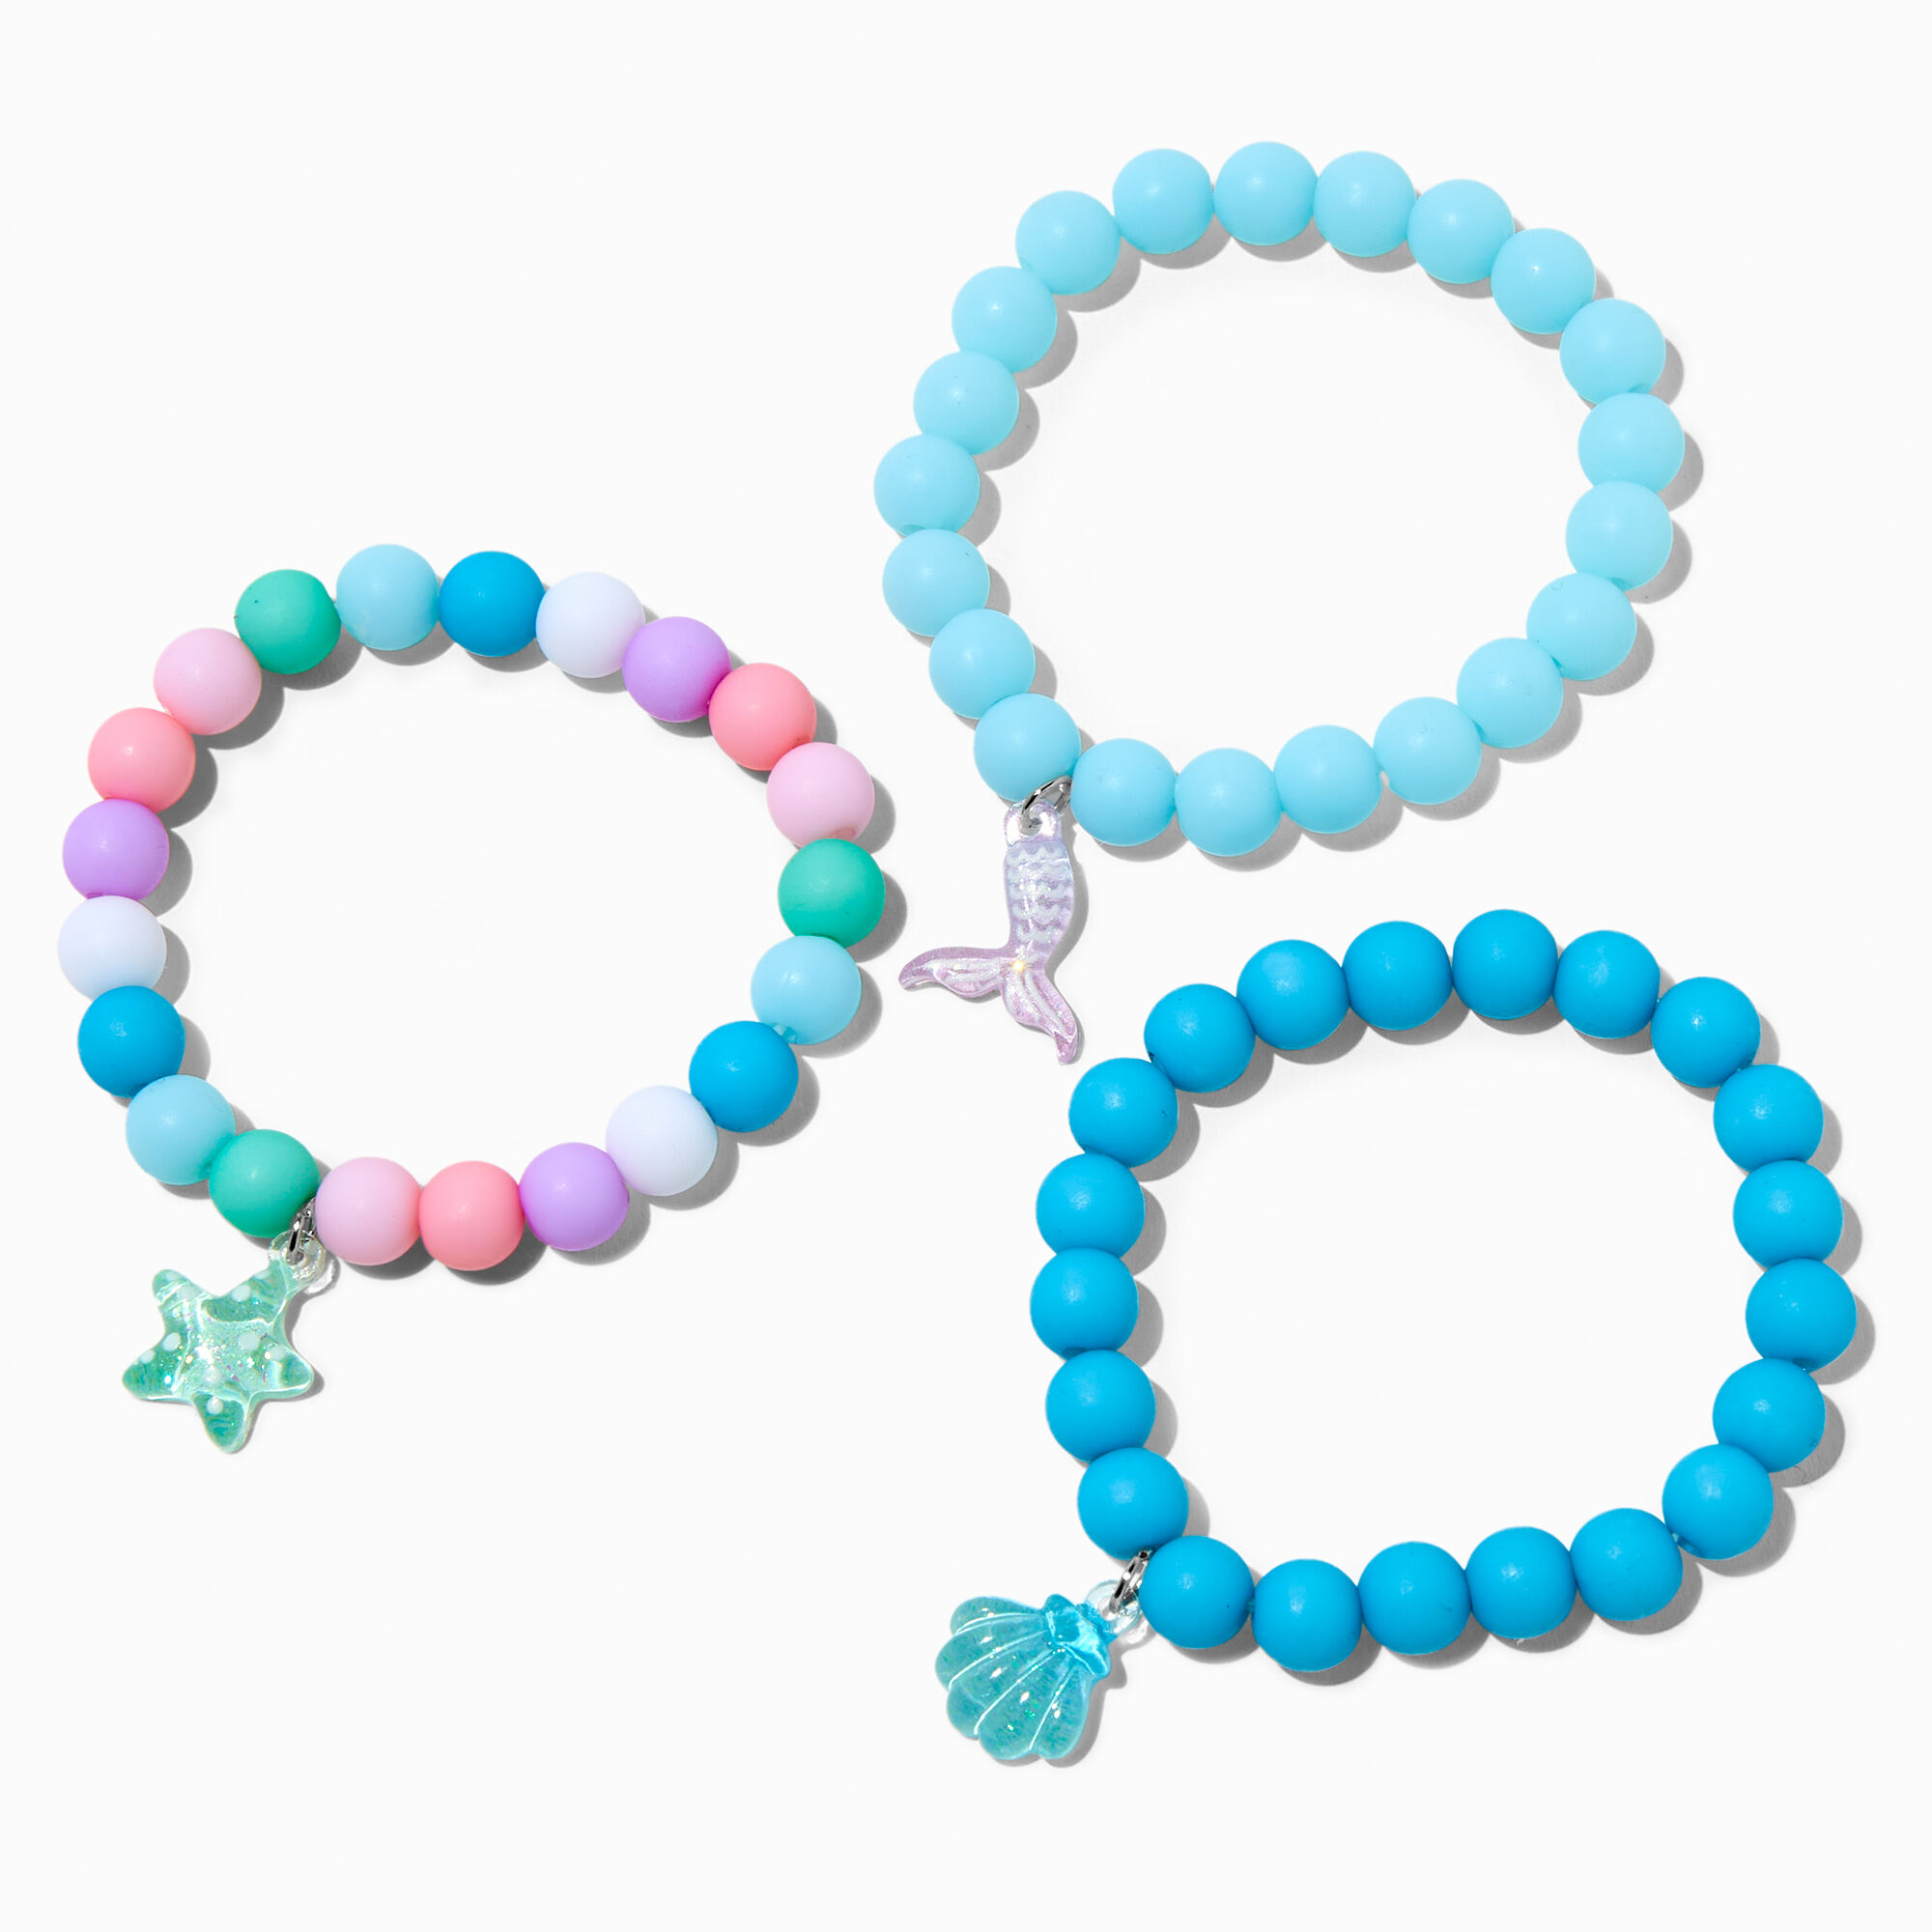 View Claires Club Mermaid Matte Beaded Stretch Bracelet Set 3 Pack information